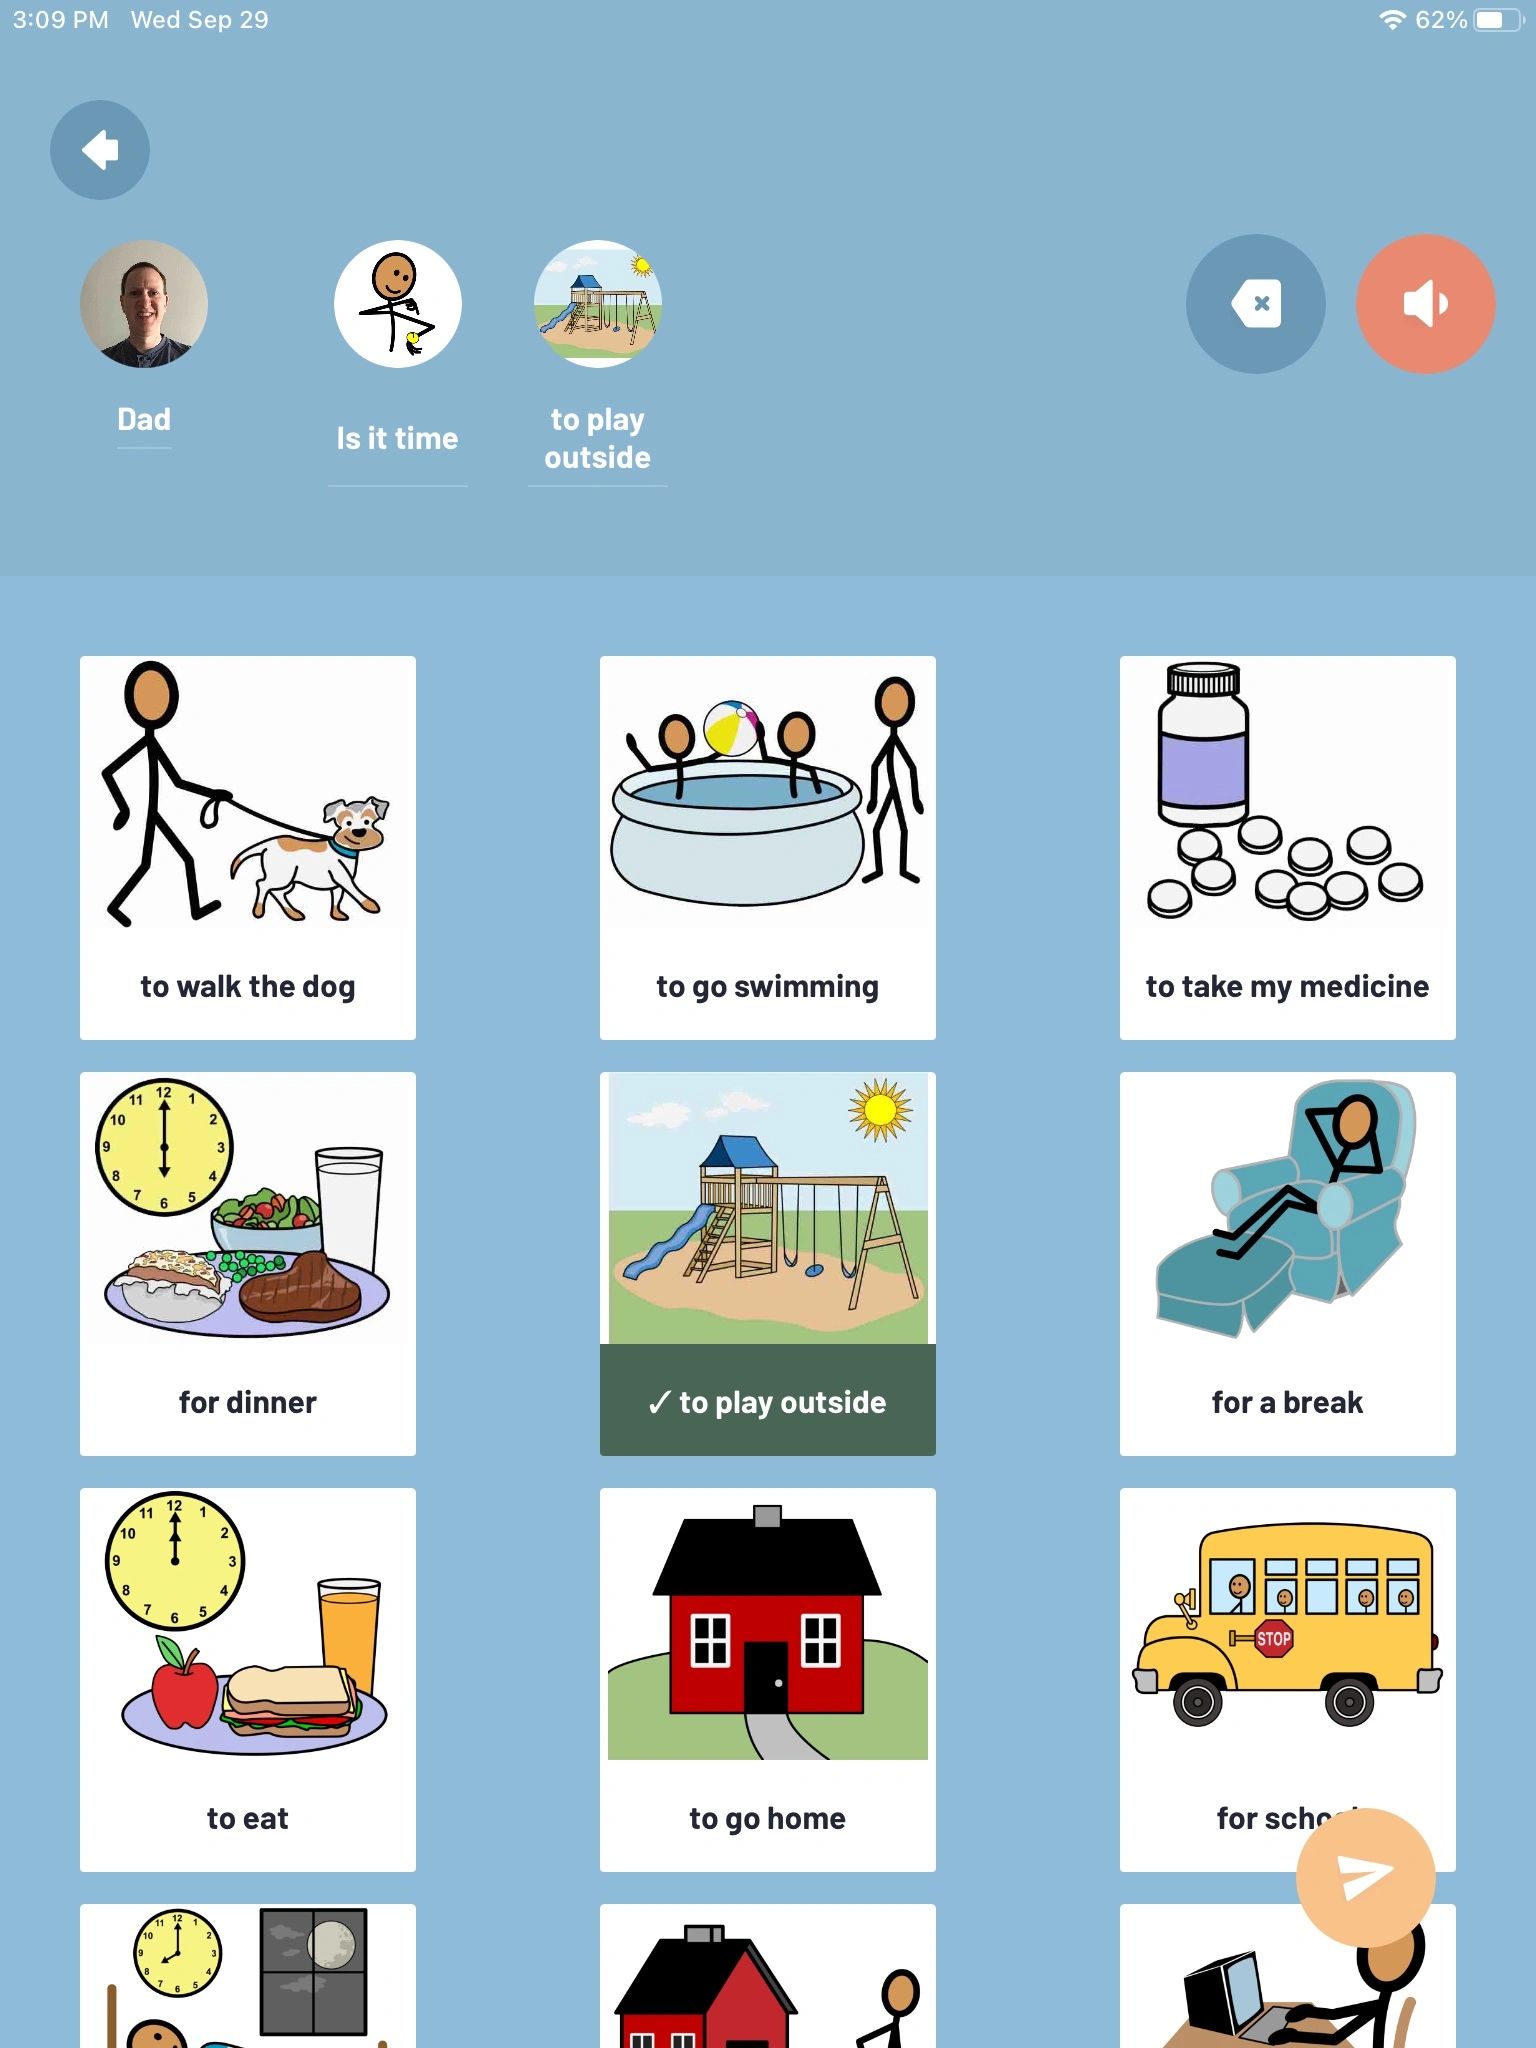 With TippyTalk, the user selects illustrations that are transferred to text and communicated.